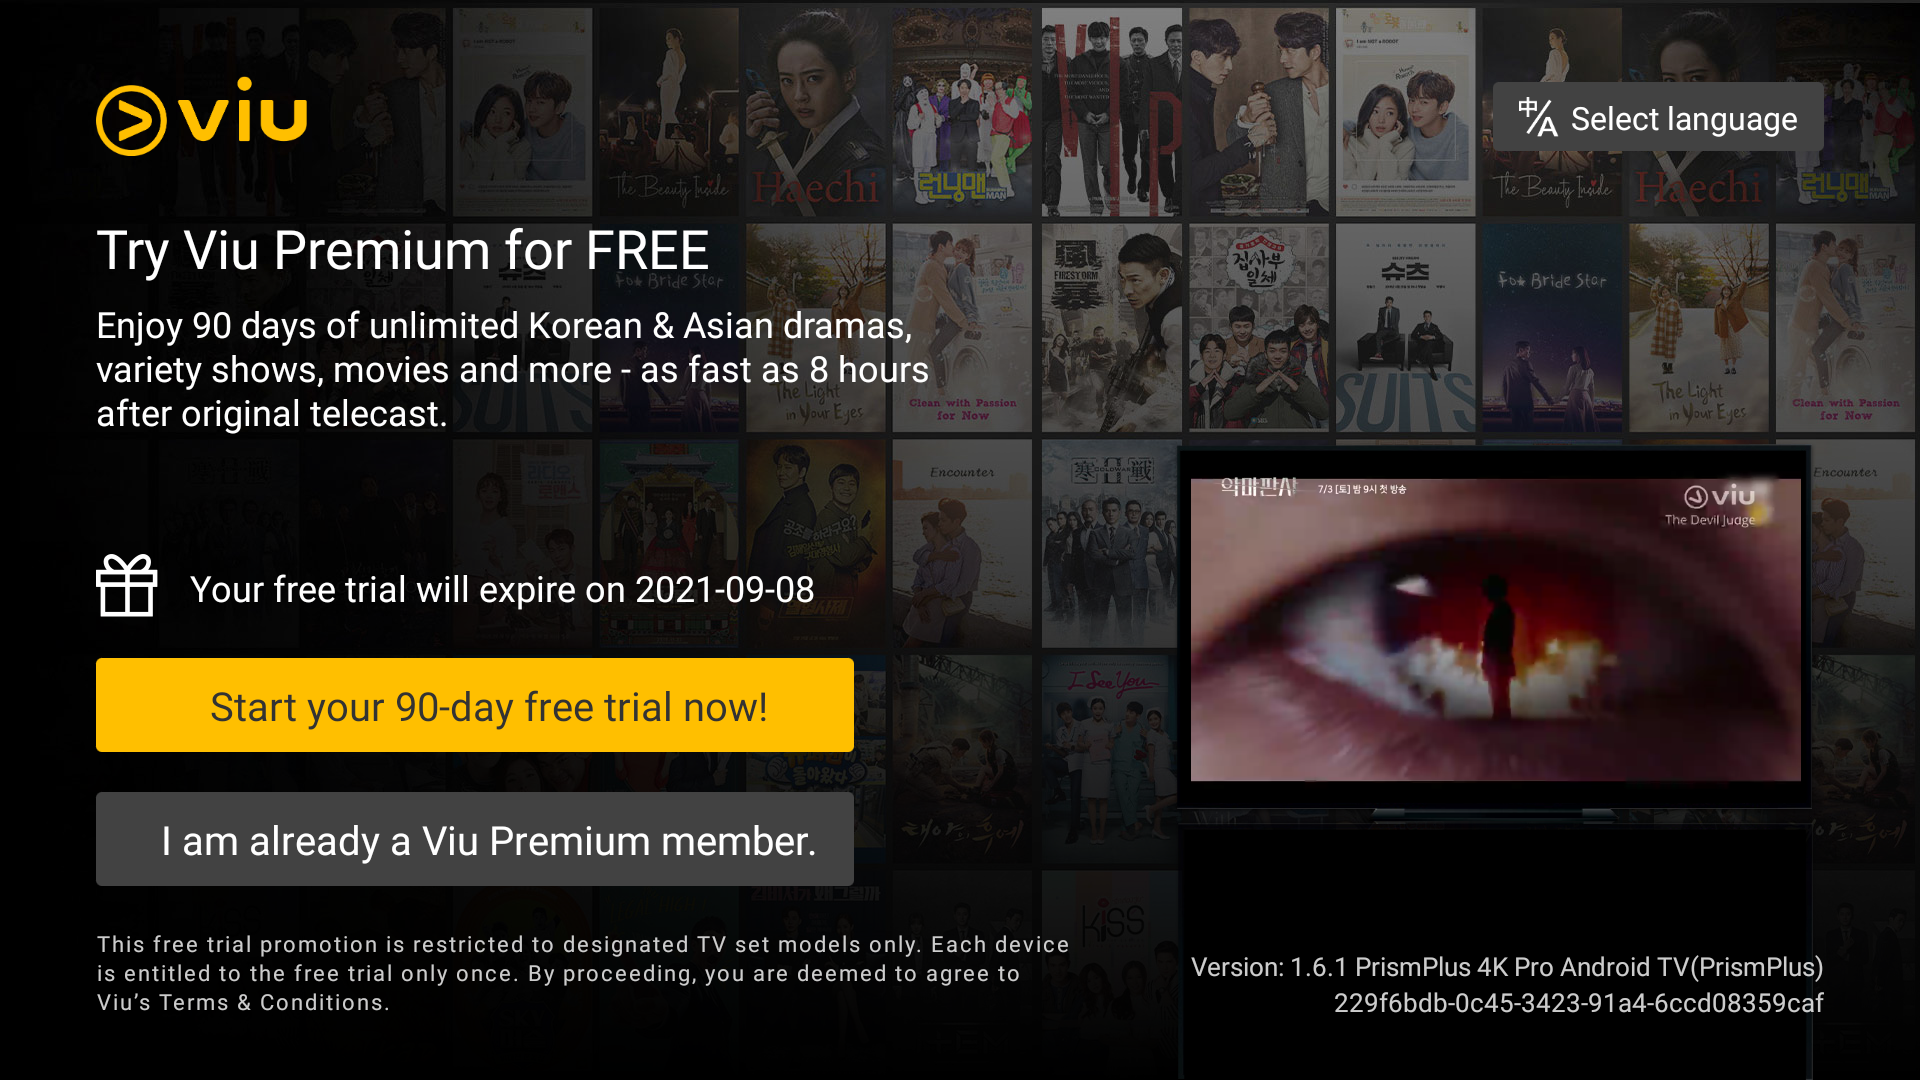 1. Launch the Viu TV app after it has been installed on the TV and click on the “Start your 90-day free trial now!” button.